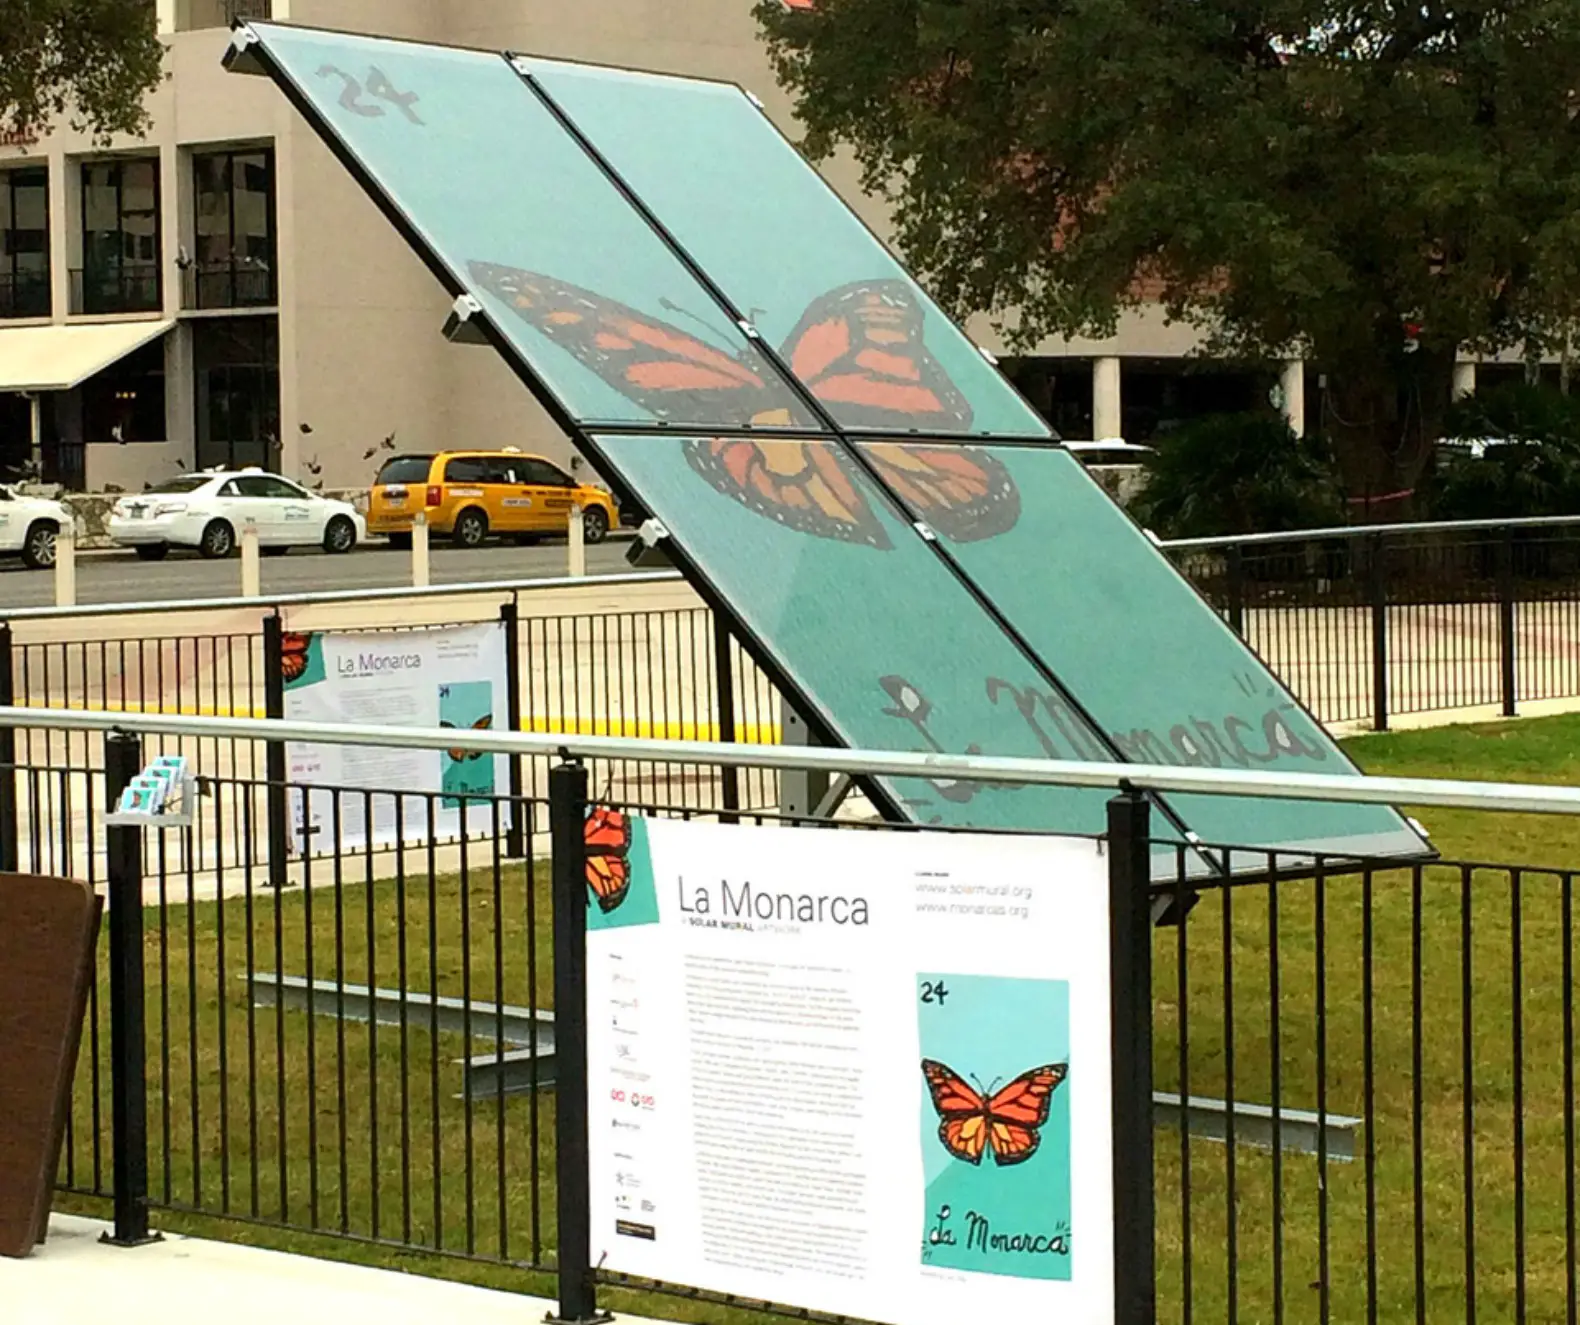 Worlds first solar panel mural unveiled in San Antonio